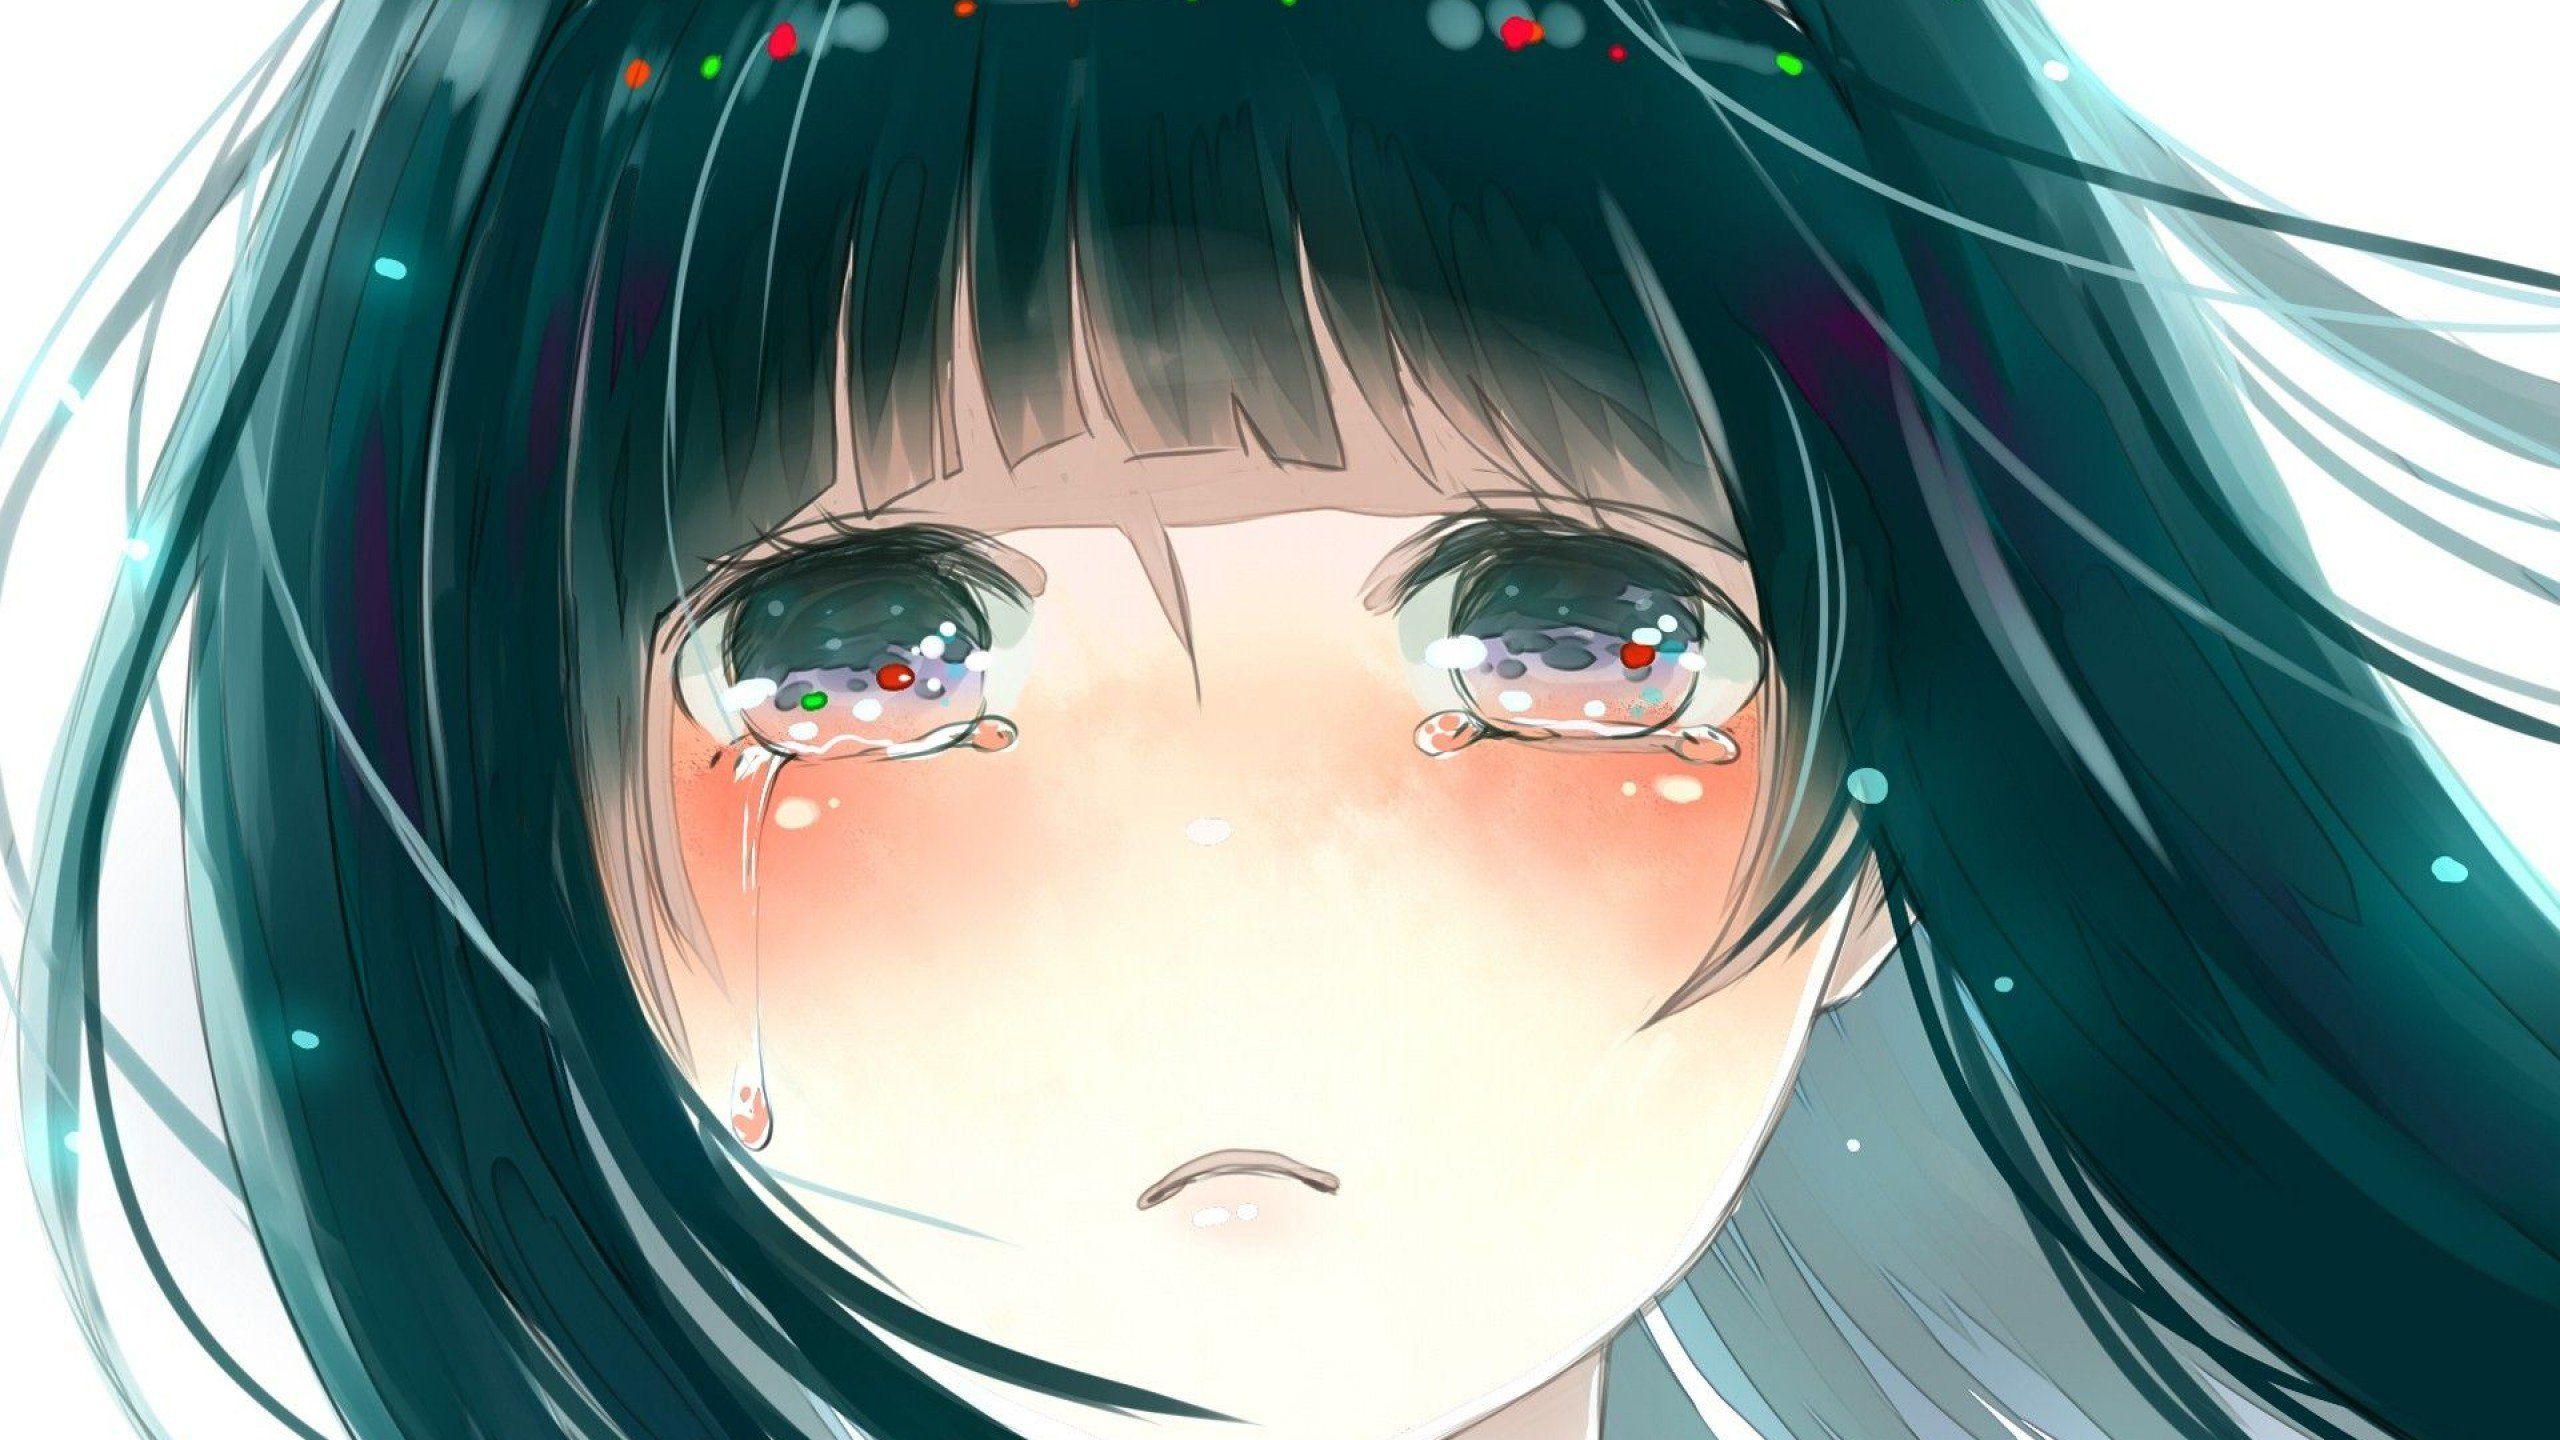 Sad Anime Faces Wallpapers Wallpaper Cave